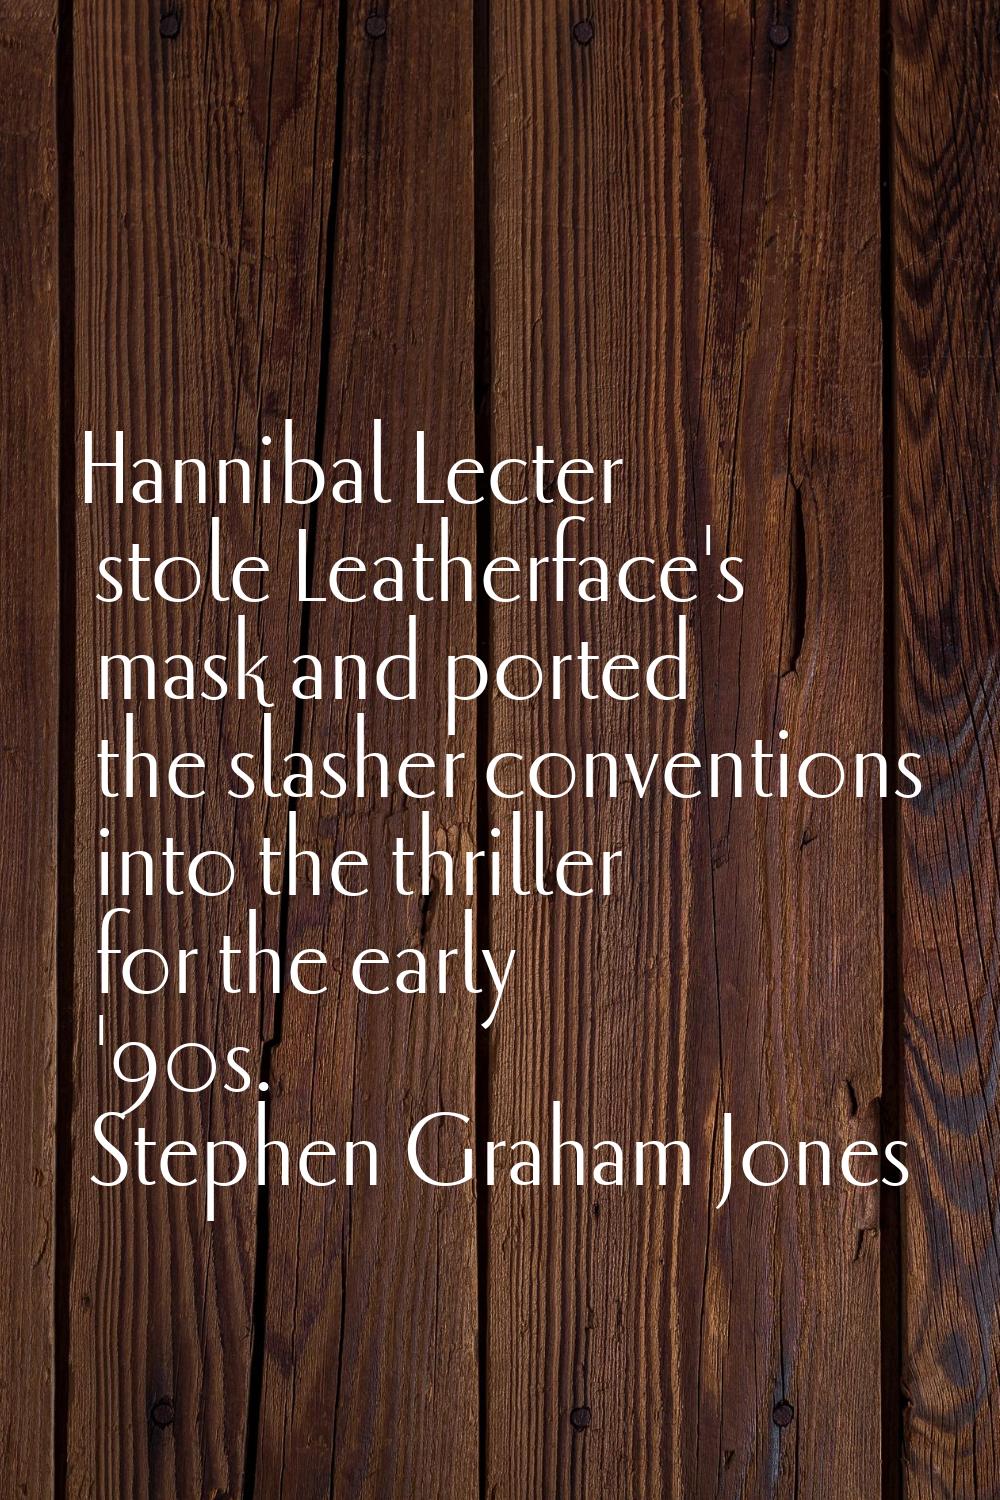 Hannibal Lecter stole Leatherface's mask and ported the slasher conventions into the thriller for t